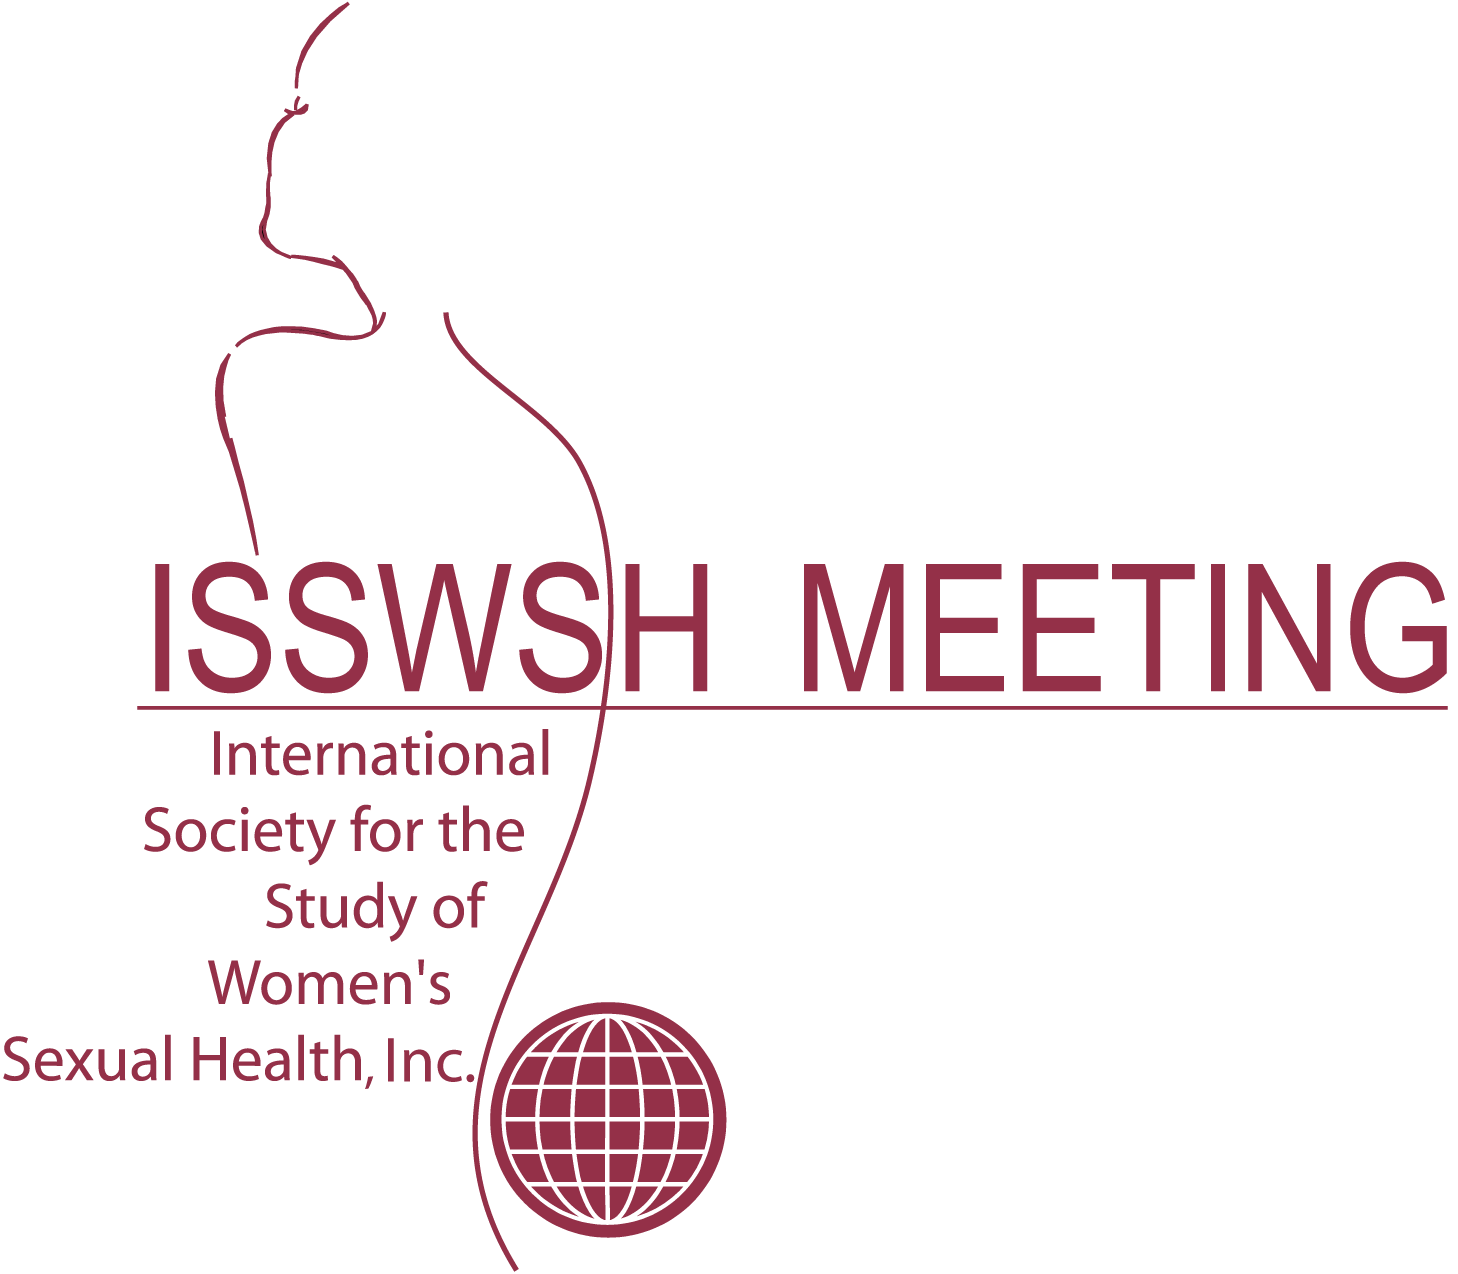 ISSWSH / ISSM 2019 - The International Society for the Study of Women's Sexual Health Annual Meeting and the International Society for Sexual Medicine (ISSM)